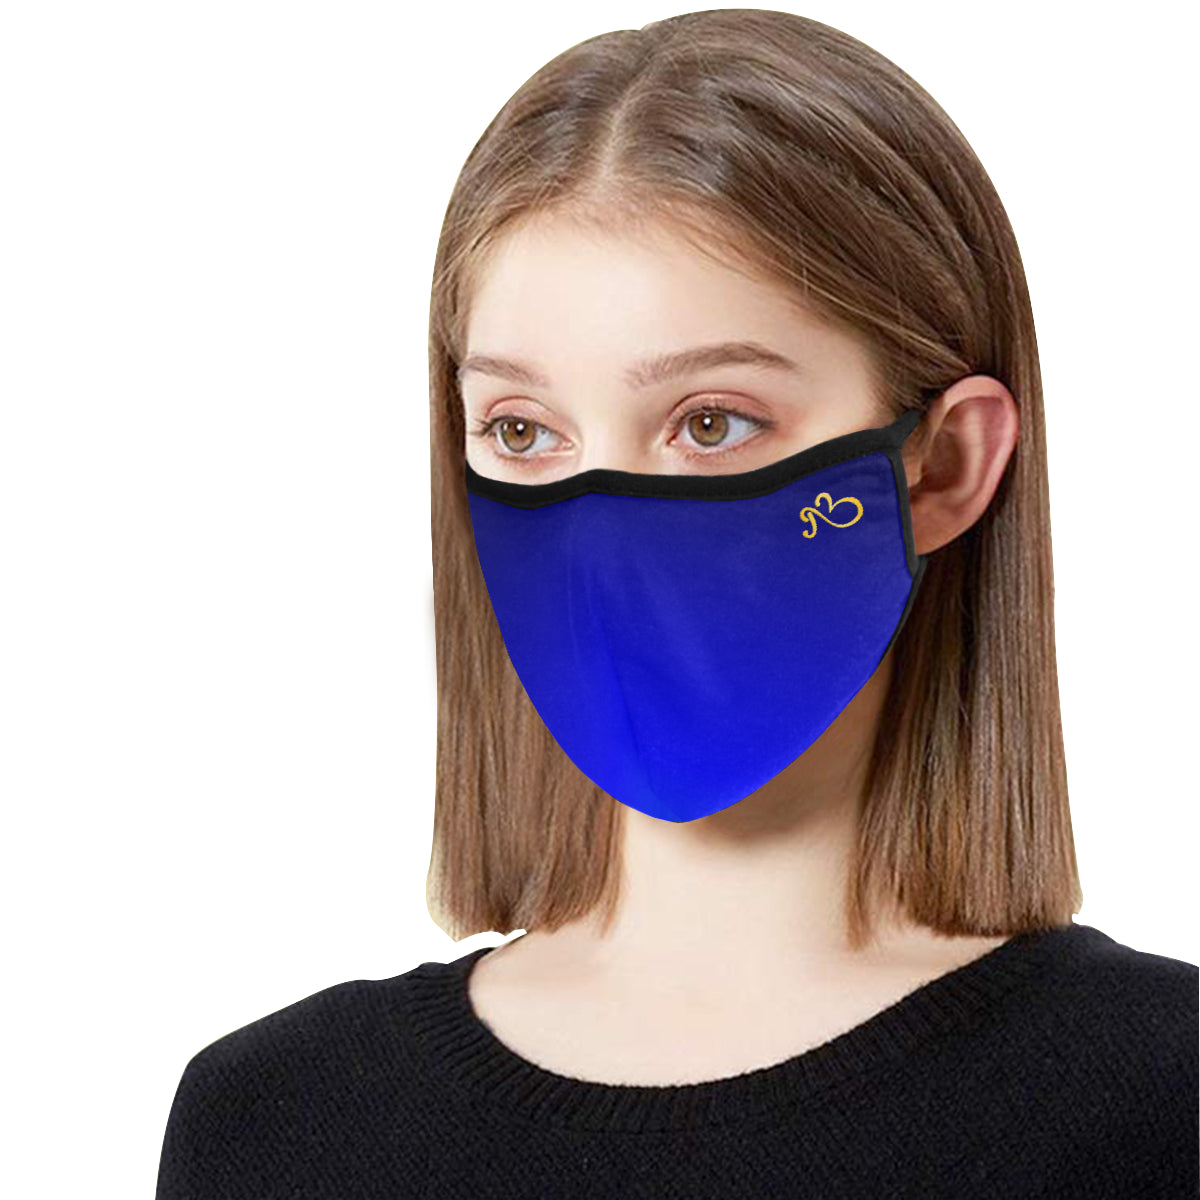 AfriBix Sky Galaxy Cotton Fabric Face Mask with filter slot (30 Filters Included) - Non-medical use